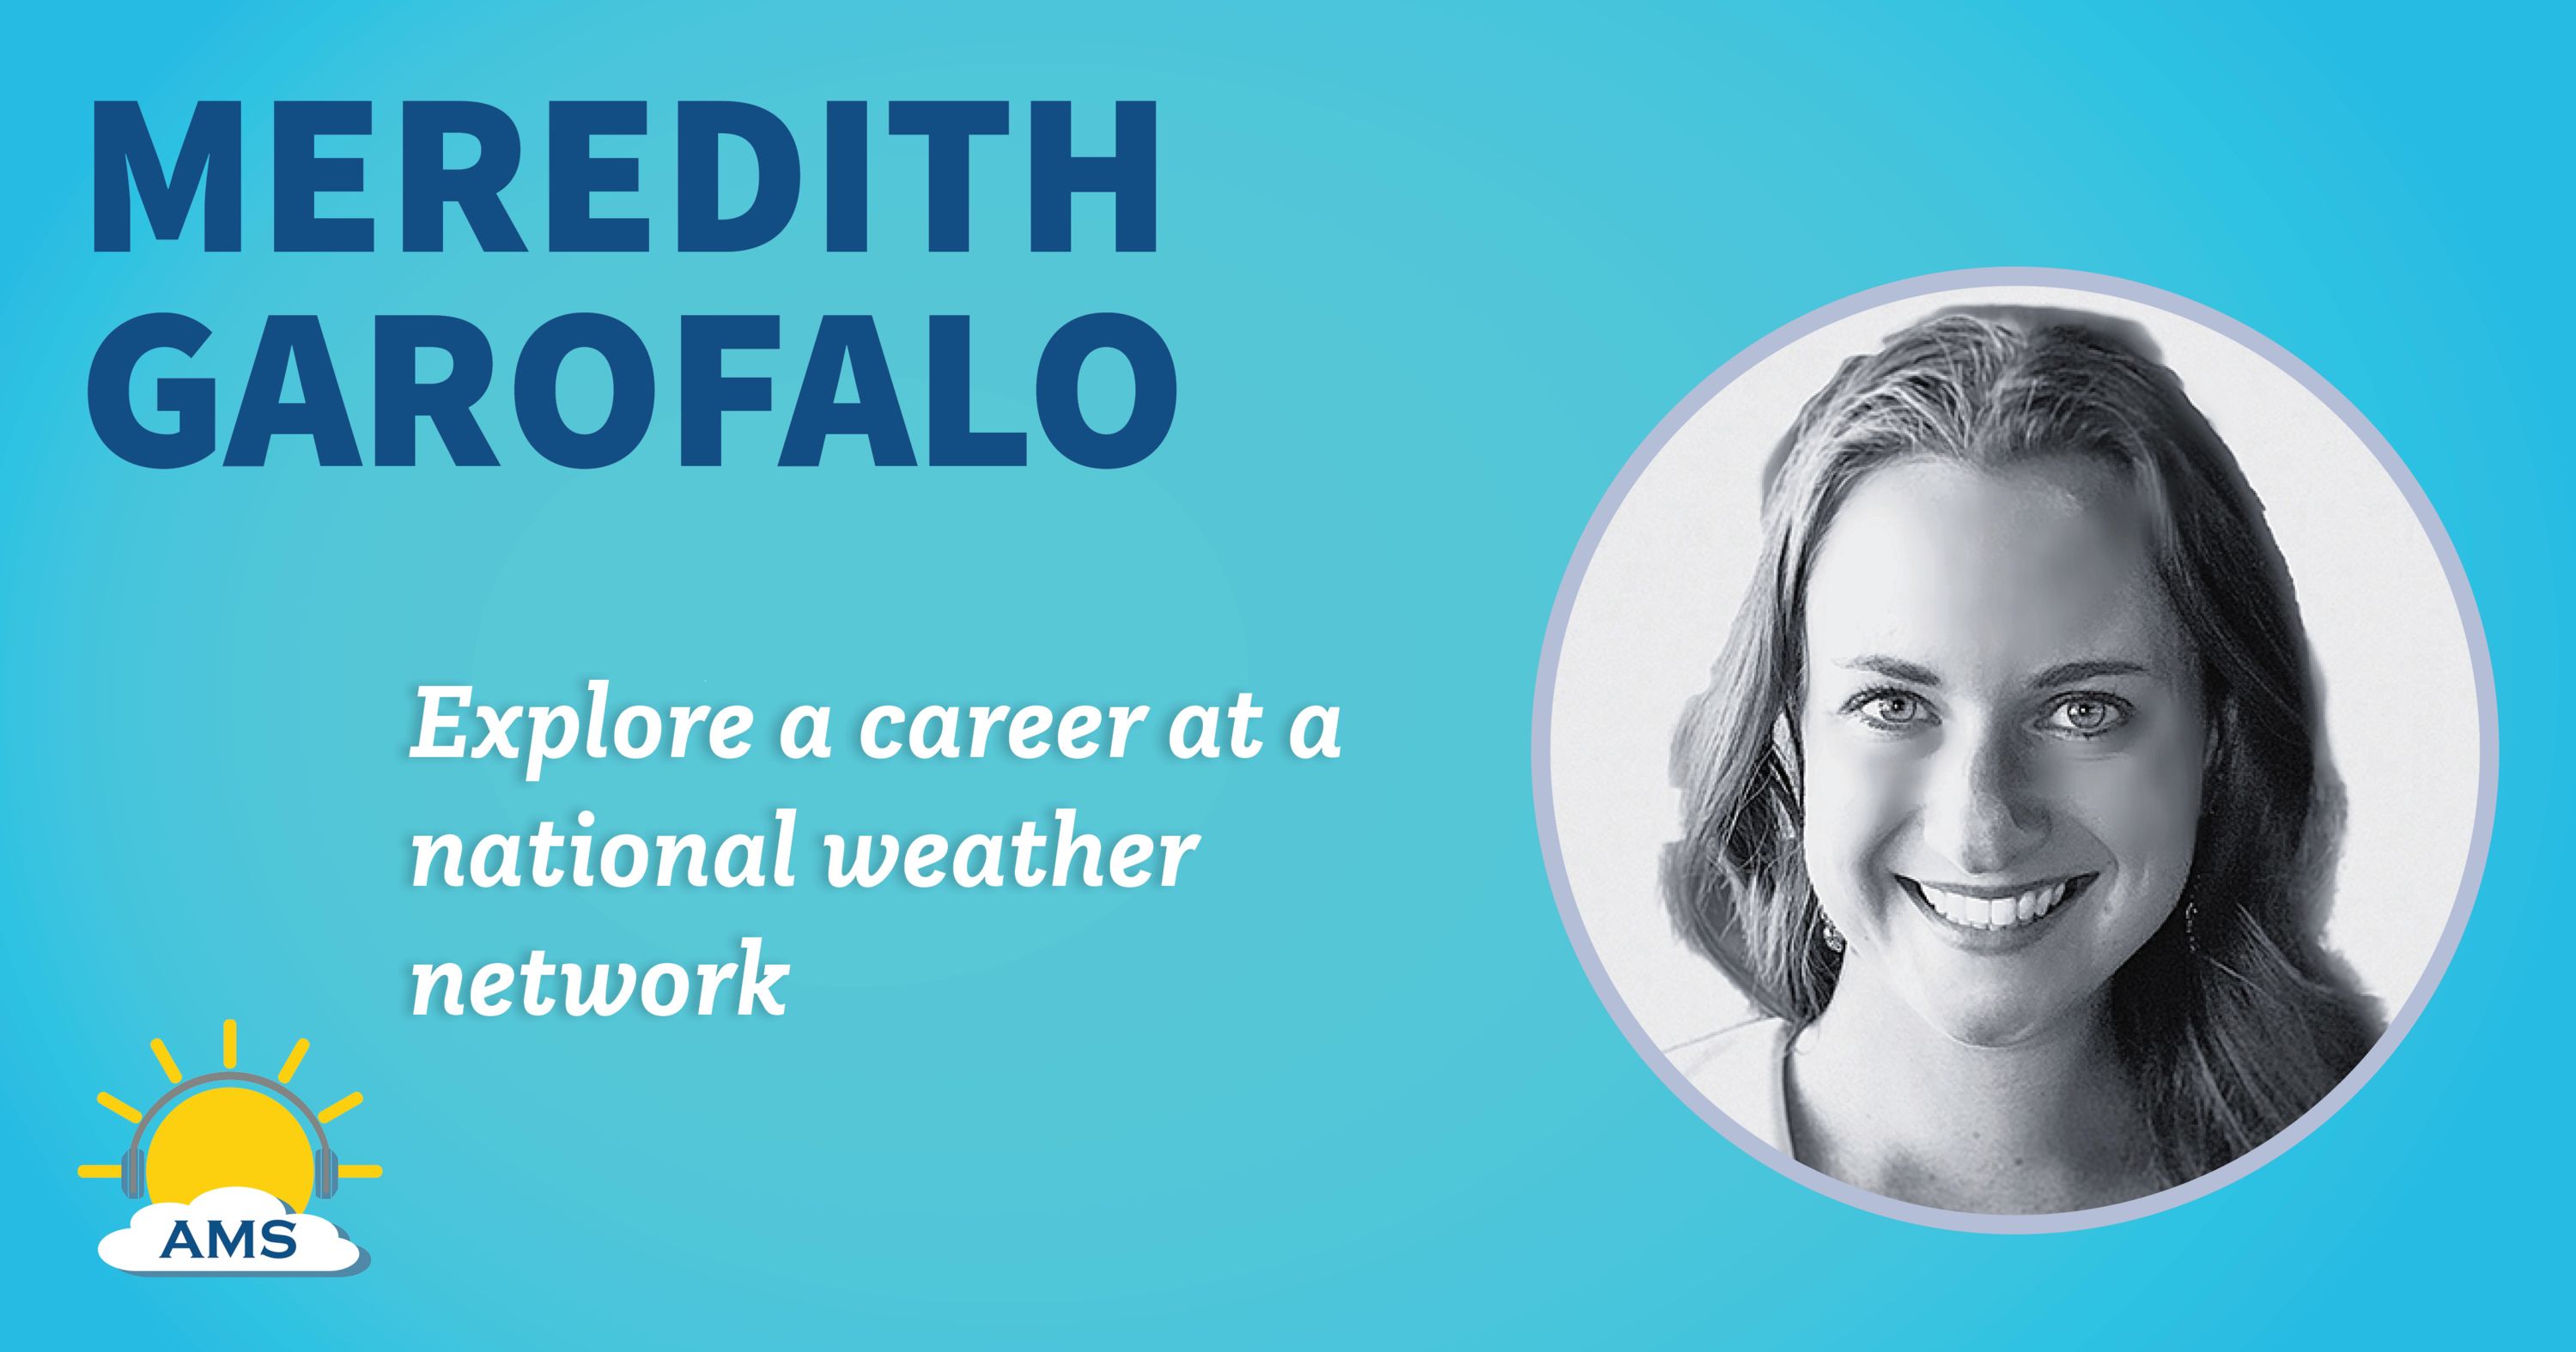 meredith garofalo headshot graphic with teaser text that reads &quotexplore a career at a national weather network"